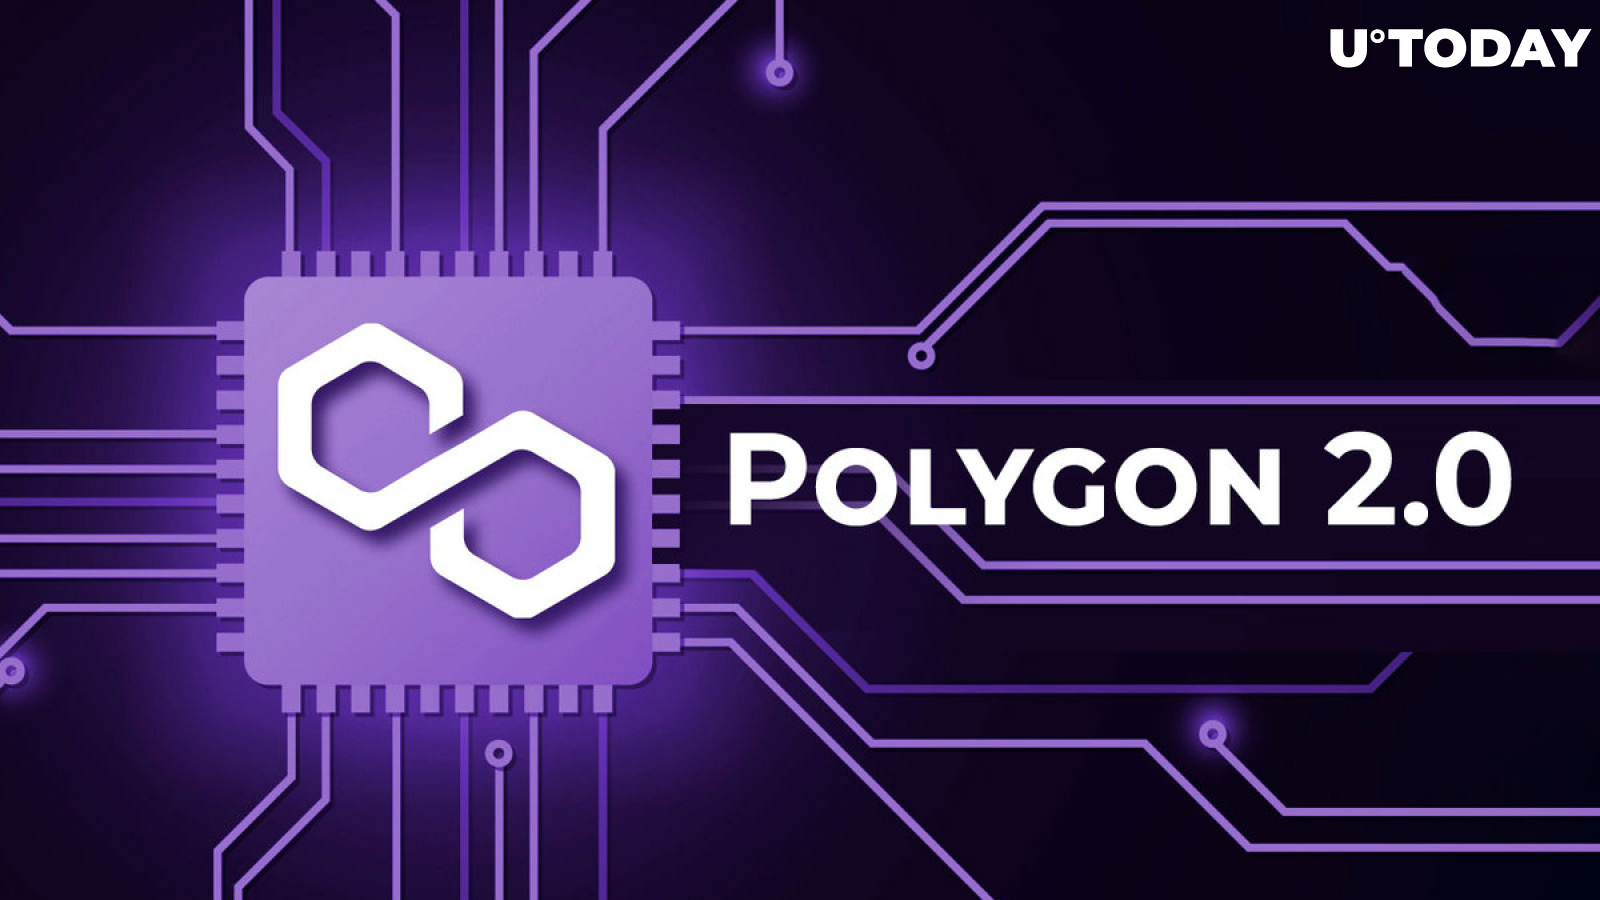 Polygon (MATIC) Takes Huge Step Toward Realizing Polygon 2.0: Details